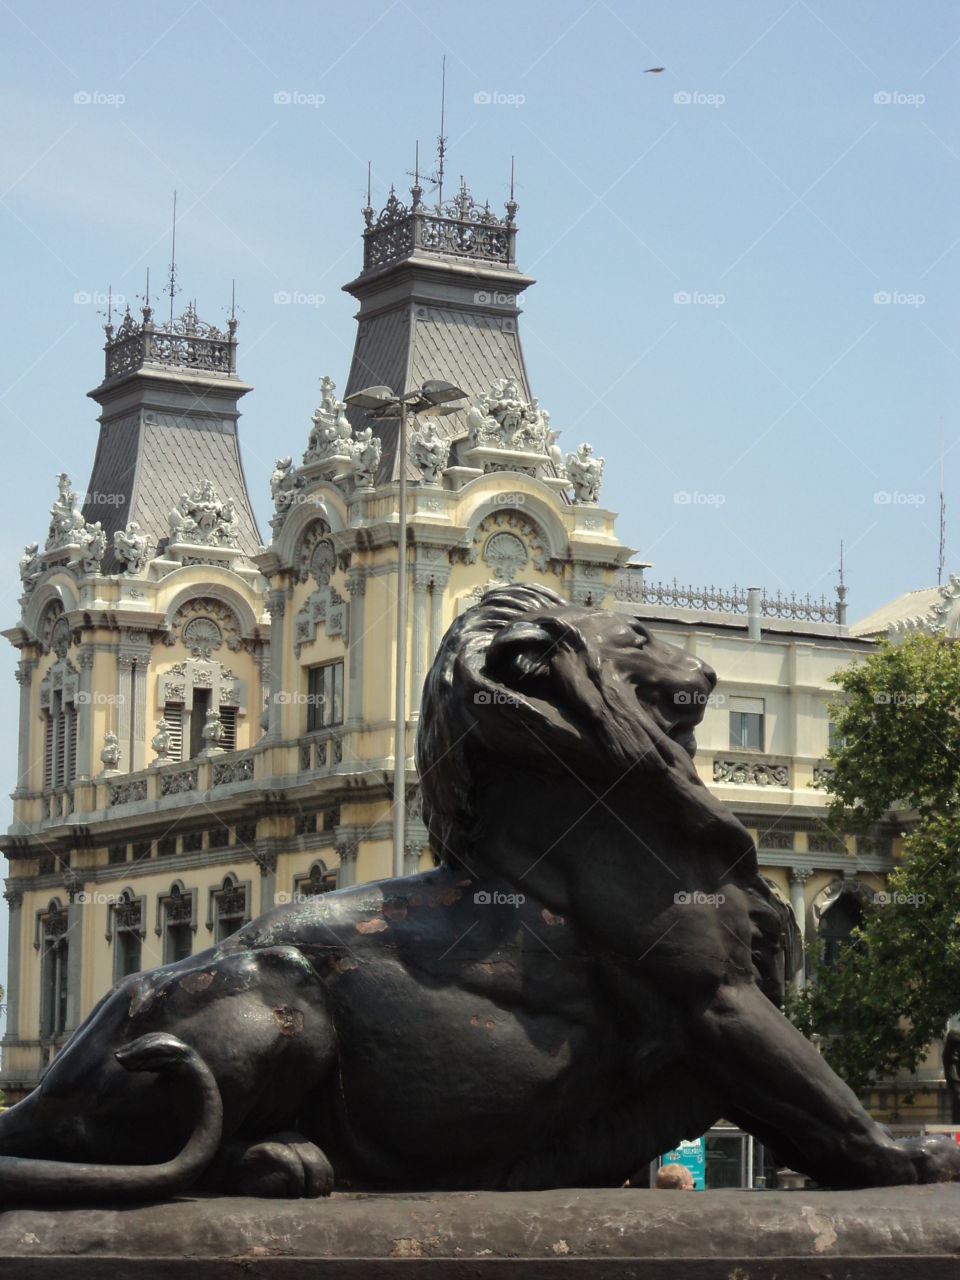 Lion from Barcelona